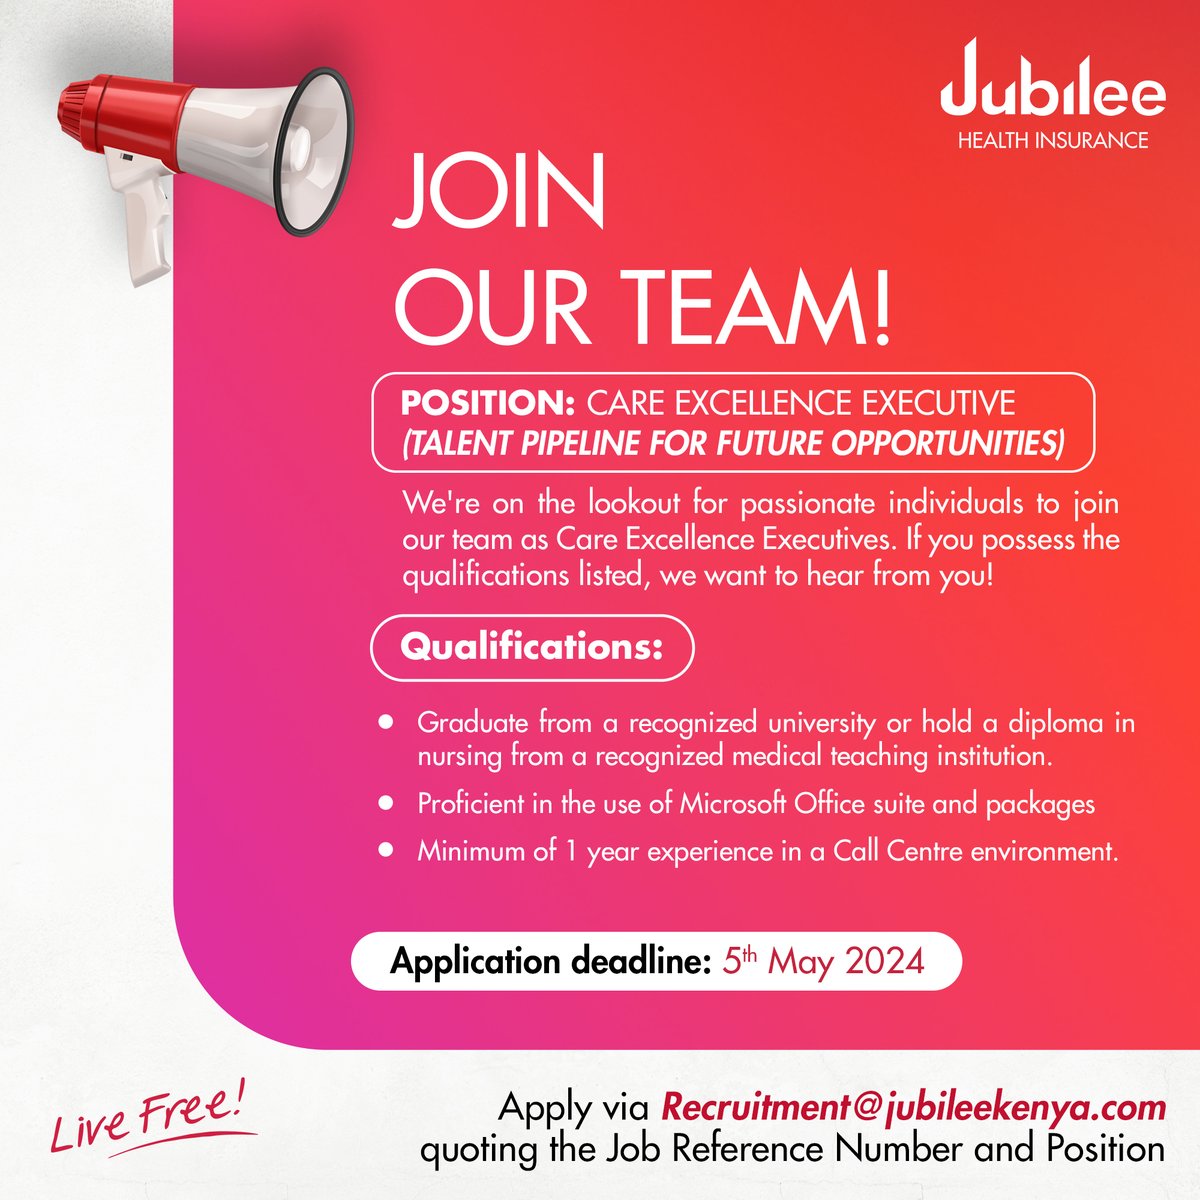 Are you passionate about healthcare excellence? Jubilee Health Insurance is seeking a dedicated Care Excellence Executive to join our team! f you're ready to make a difference in the industry, send us your resume by May 5th, 2024. Apply now!
#JubileeHealth #IkoKazi .